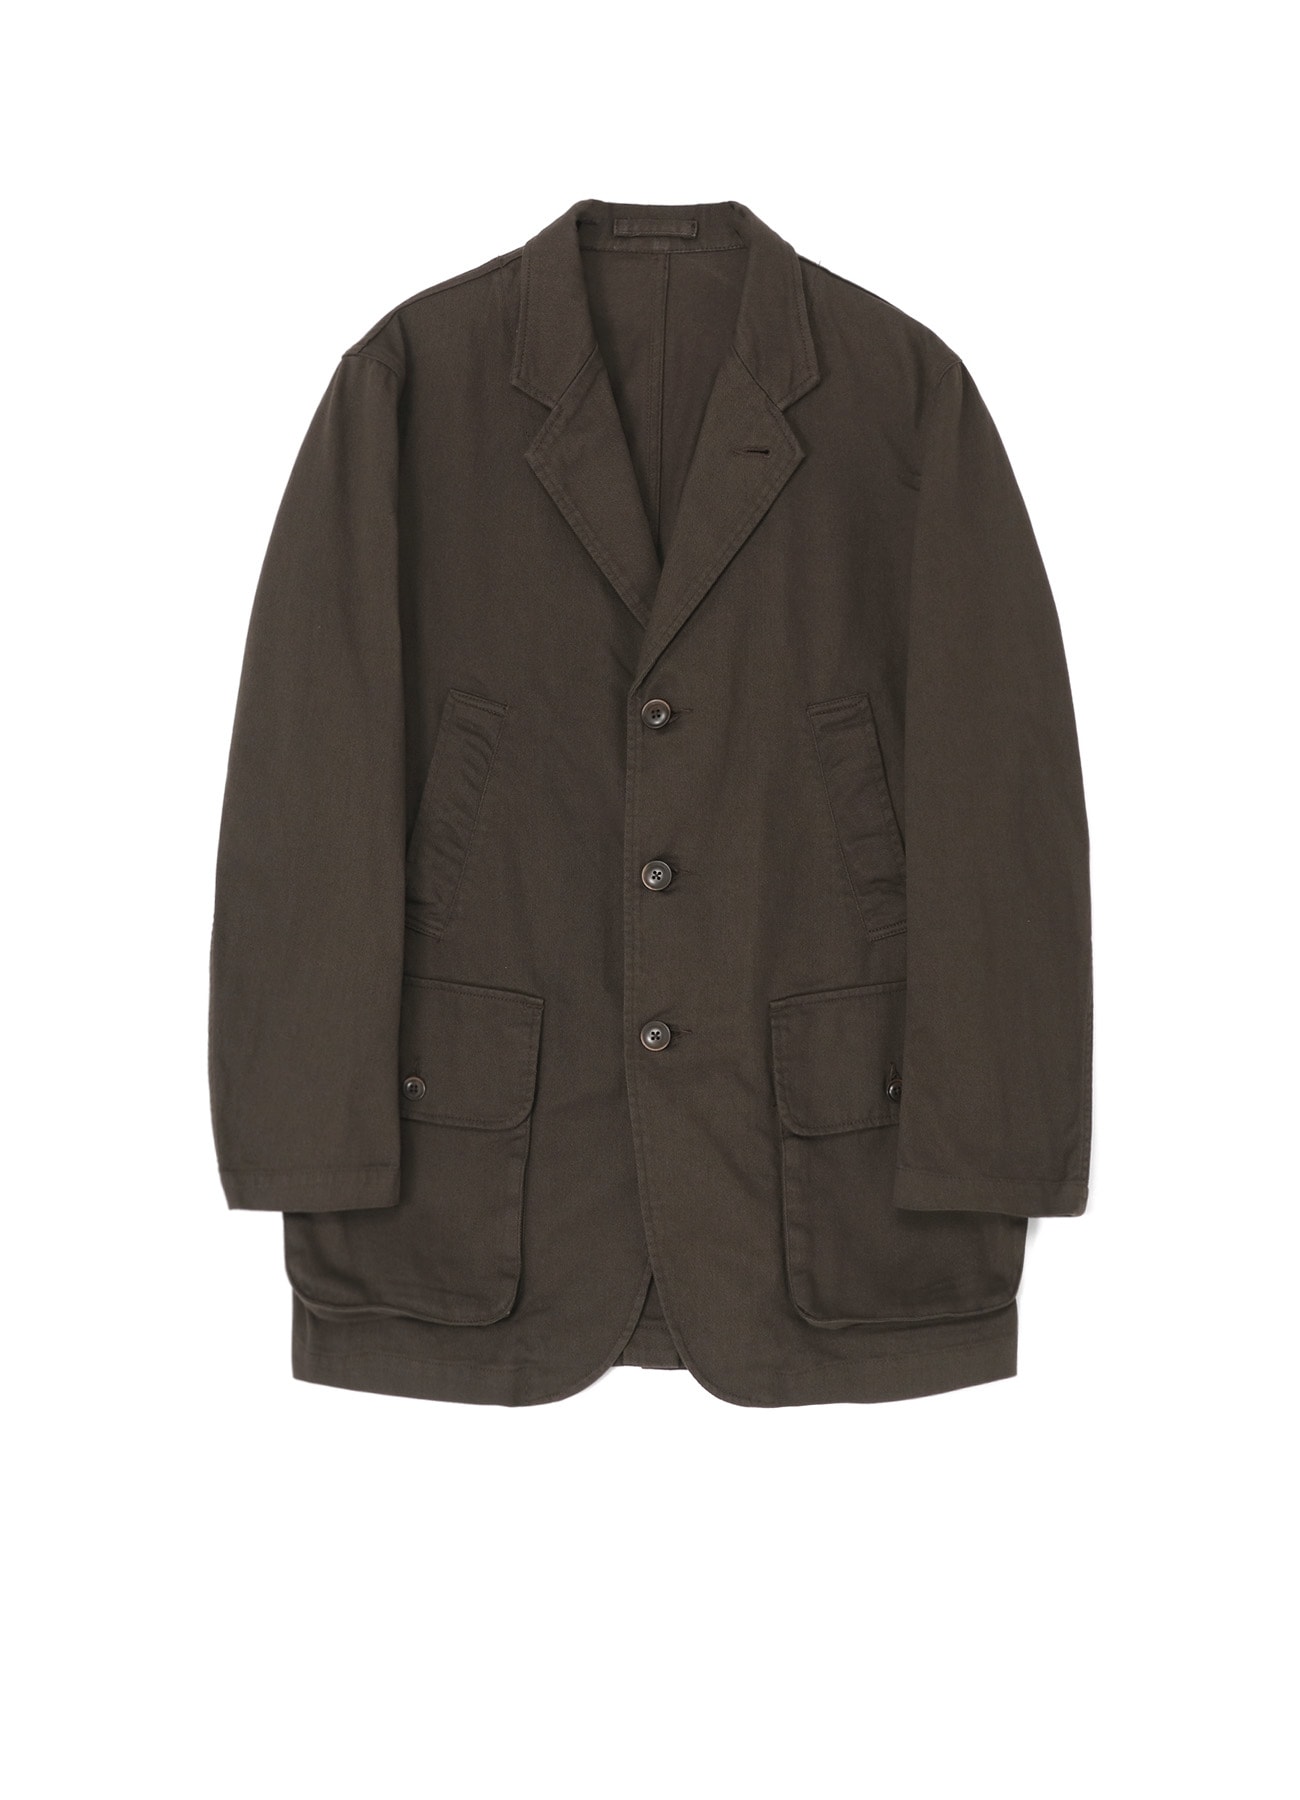 COTTON DRILL SINGLE BREASTED JACKET WITH BOX POCKETS(S Brown